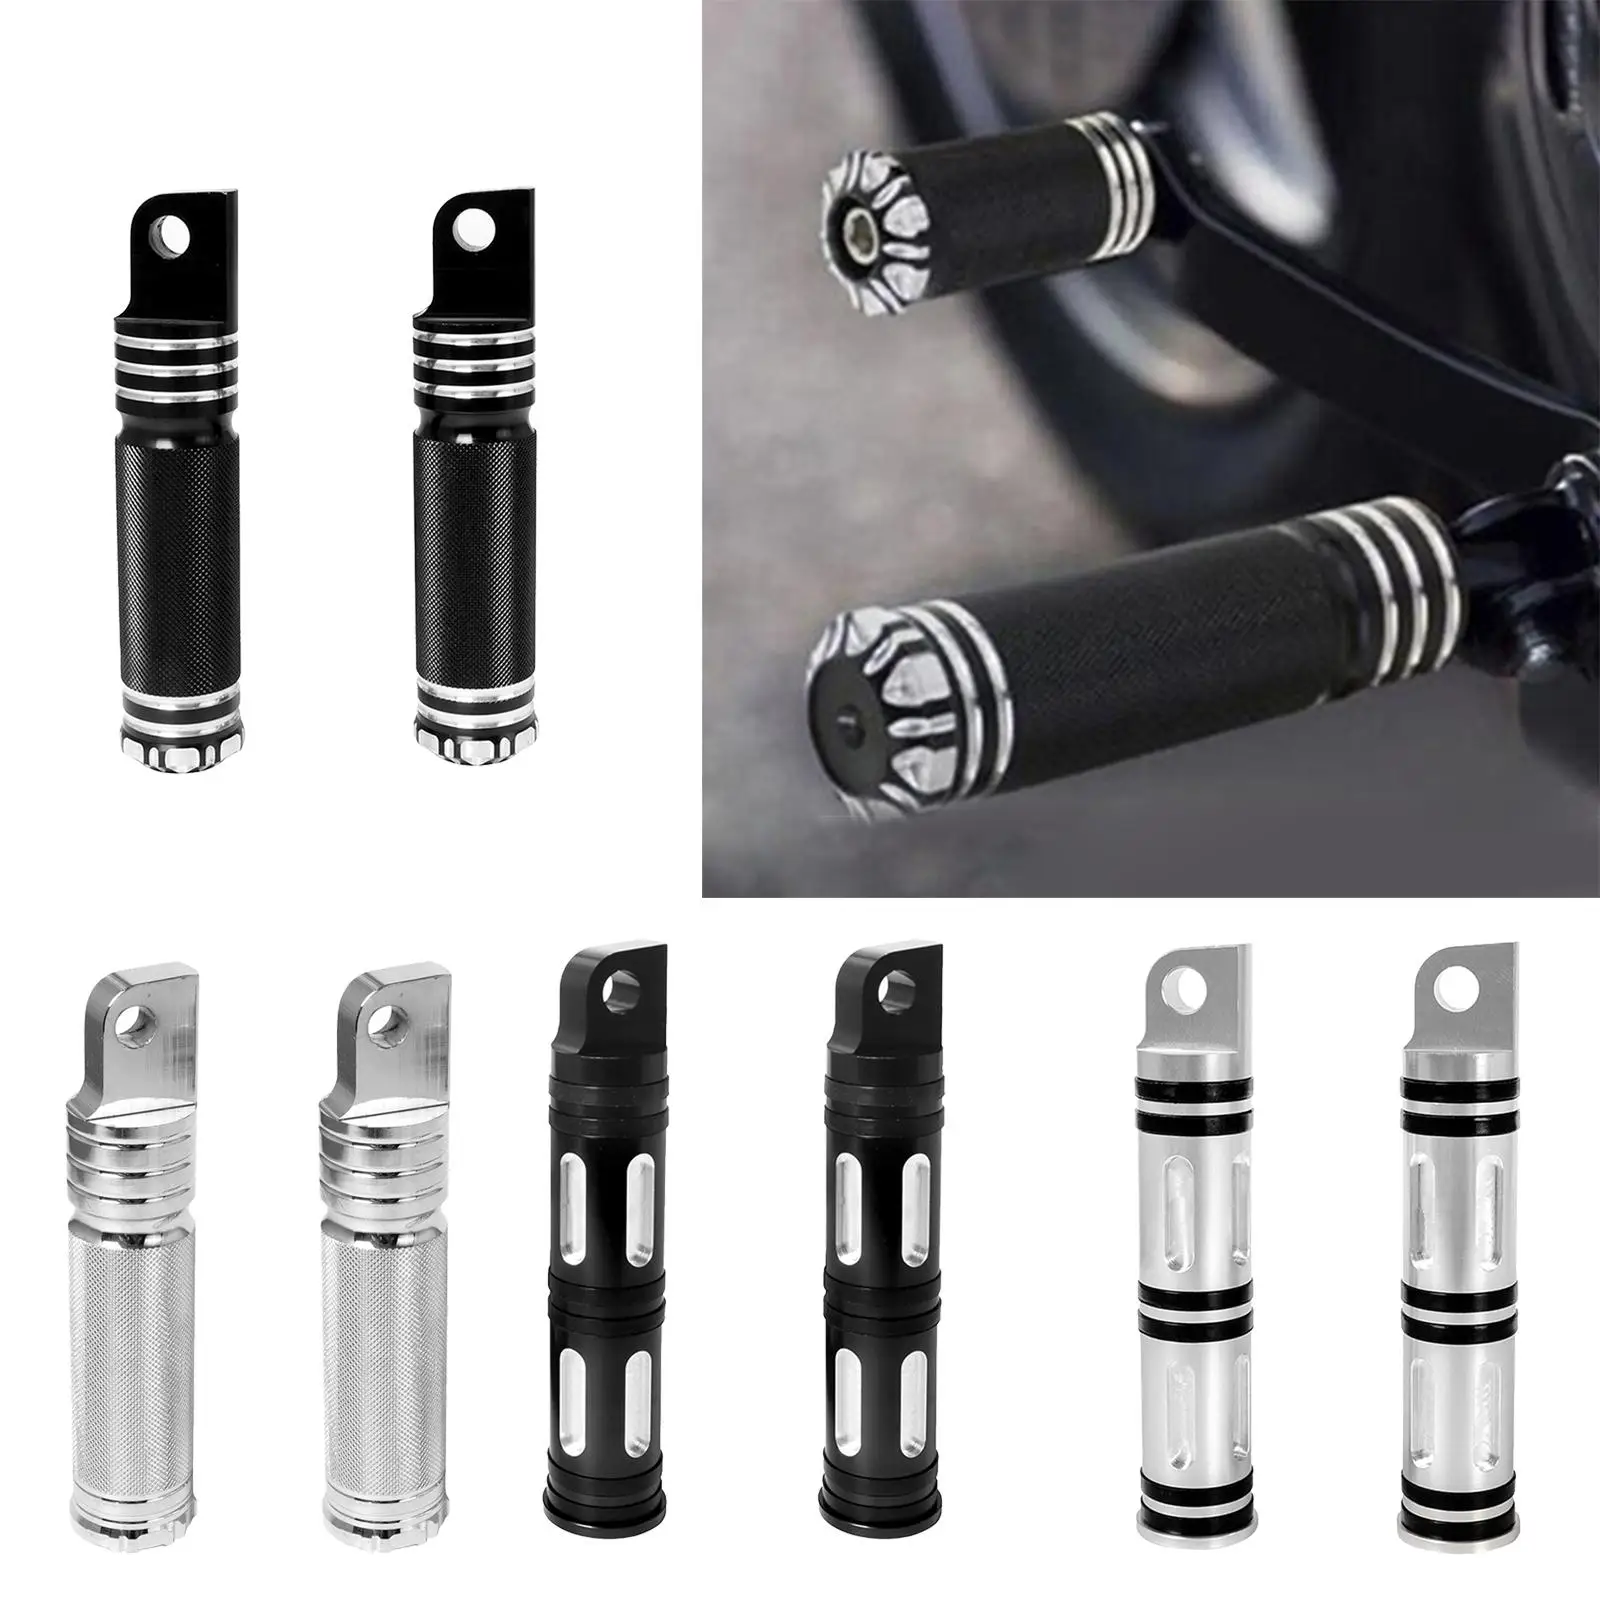 2Pcs Motorcycle Rear Foot Pegs Rest Pedals for  Street